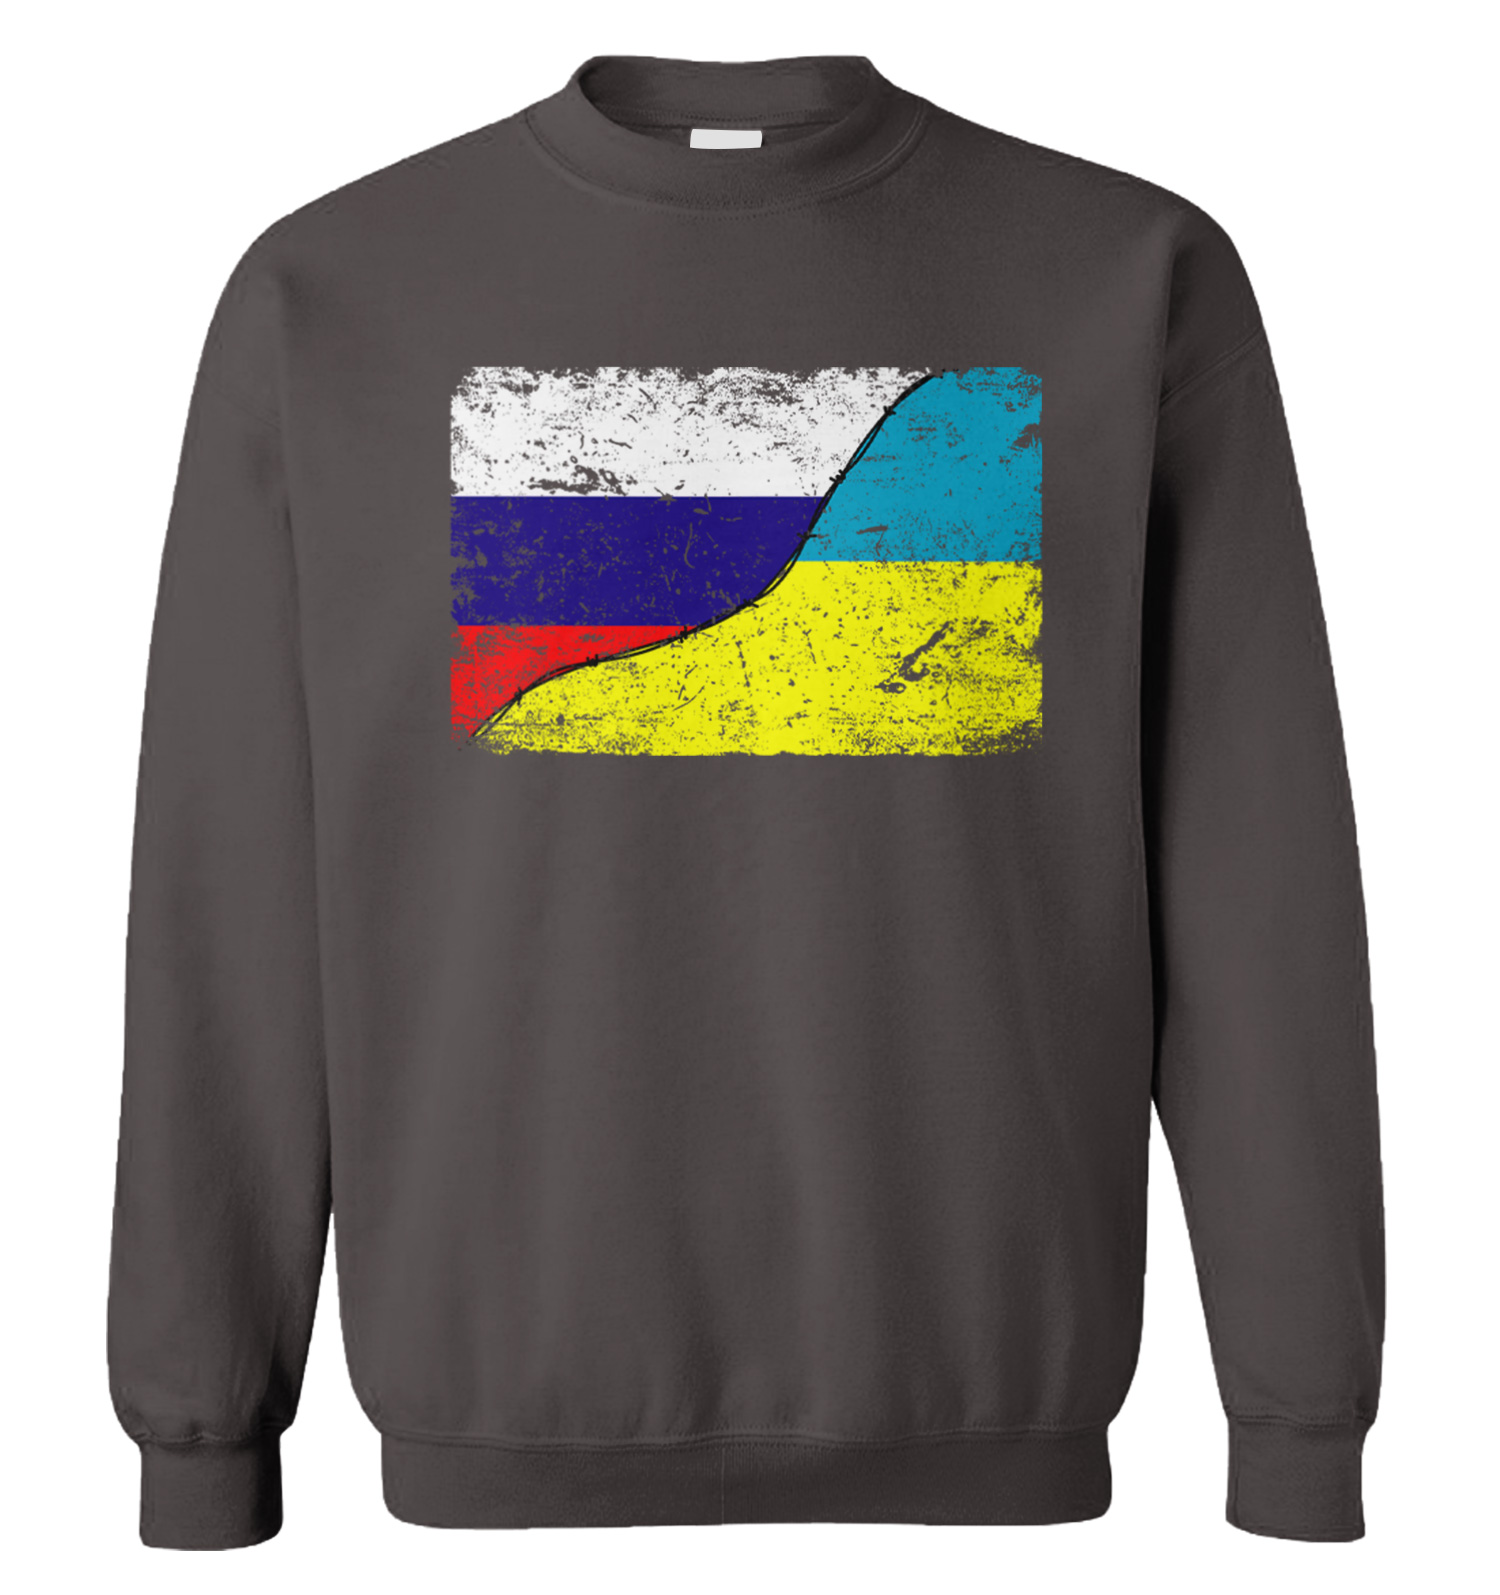 Russian And Ukrainian Flags With Barbed Wire - Divided Unisex Sweatshirt